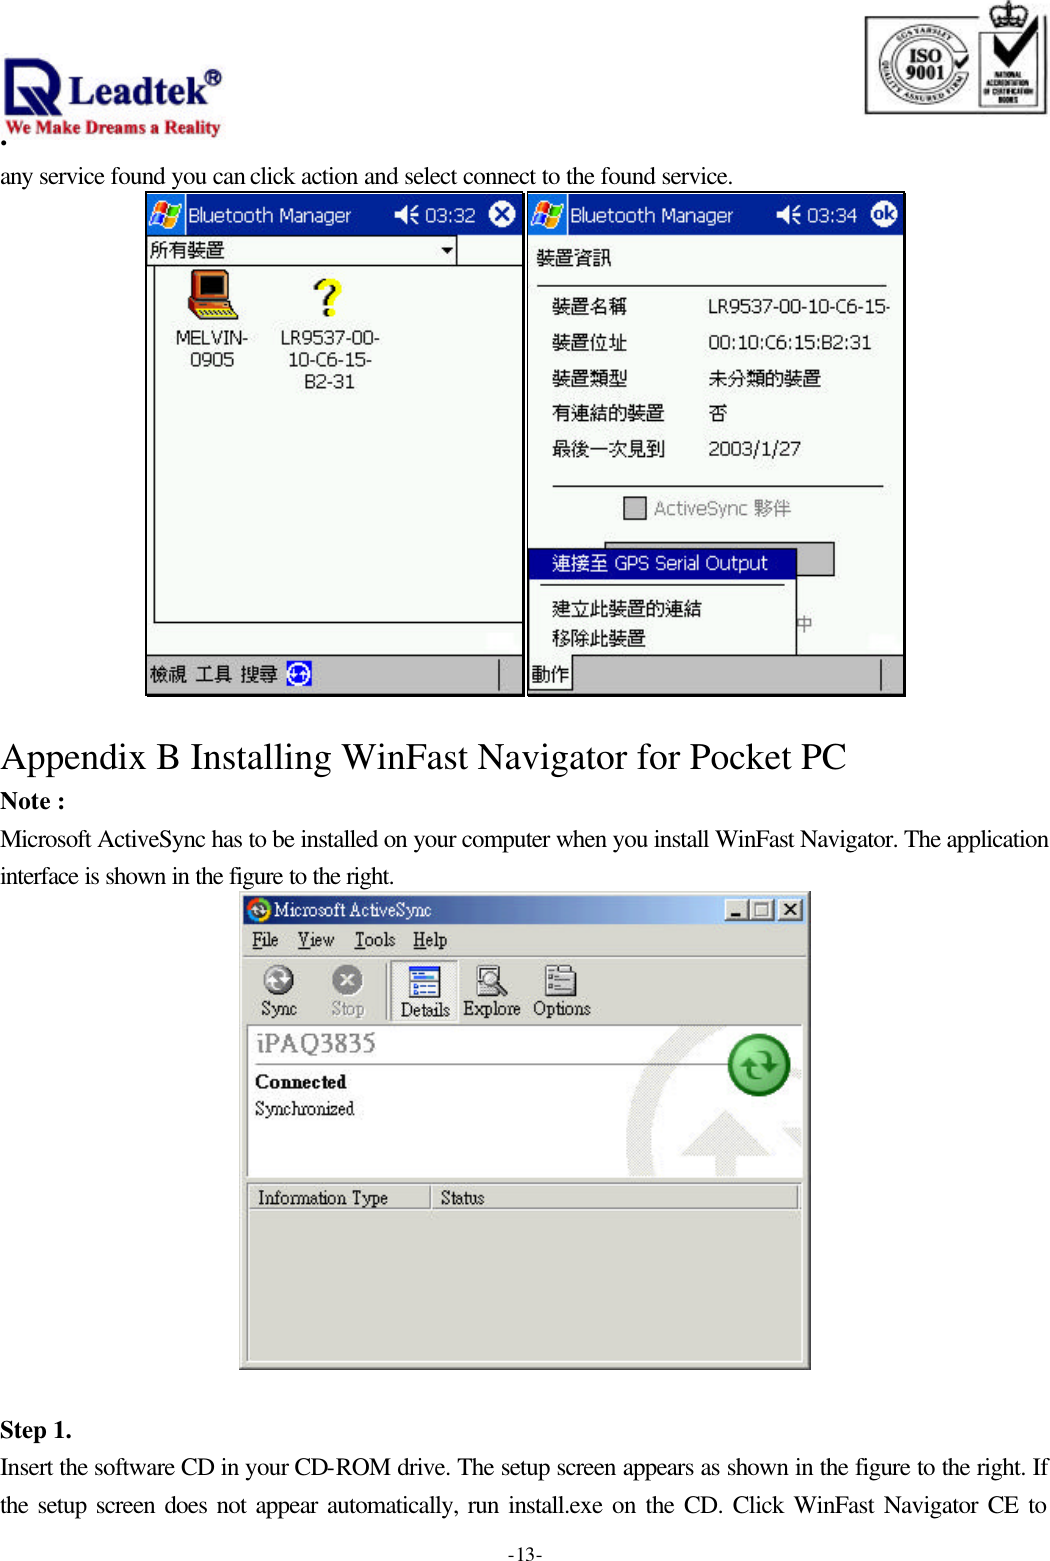                                                                              . -  - 13any service found you can click action and select connect to the found service.   Appendix B Installing WinFast Navigator for Pocket PC Note :   Microsoft ActiveSync has to be installed on your computer when you install WinFast Navigator. The application interface is shown in the figure to the right.   Step 1. Insert the software CD in your CD-ROM drive. The setup screen appears as shown in the figure to the right. If the setup screen does not appear automatically, run install.exe on the CD. Click WinFast Navigator CE to 